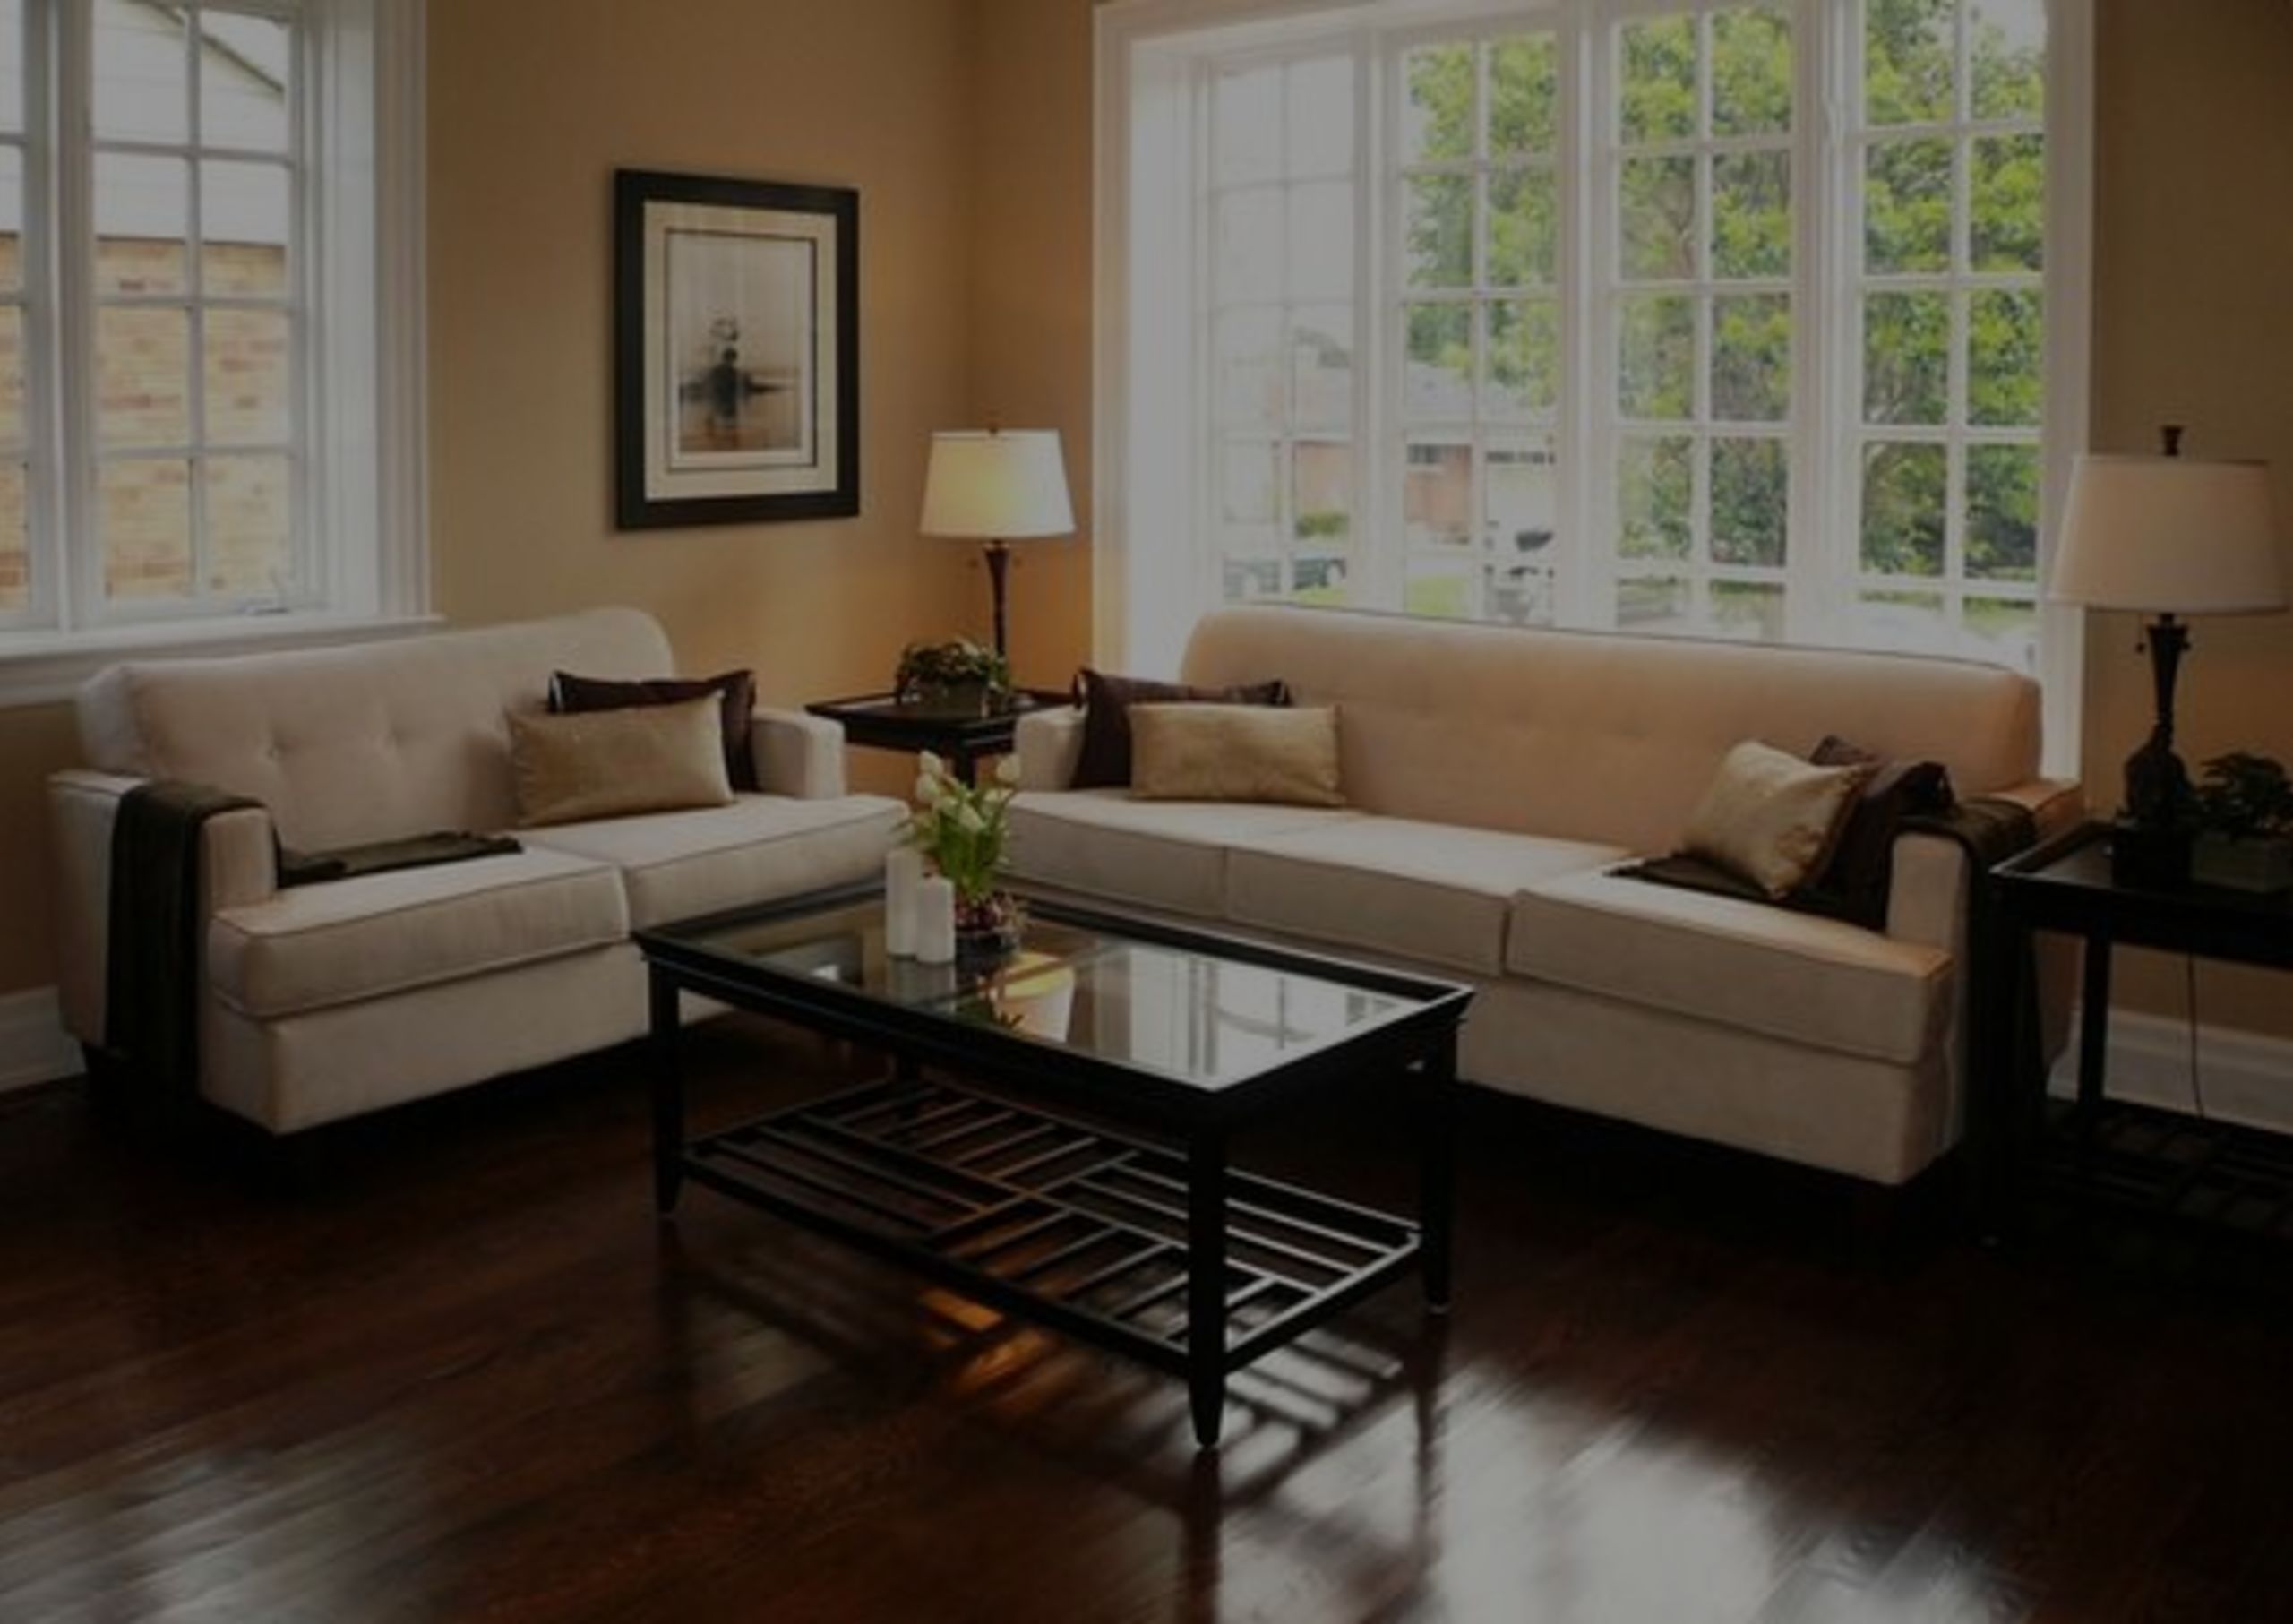 Staging Your Home for the 2020 Market